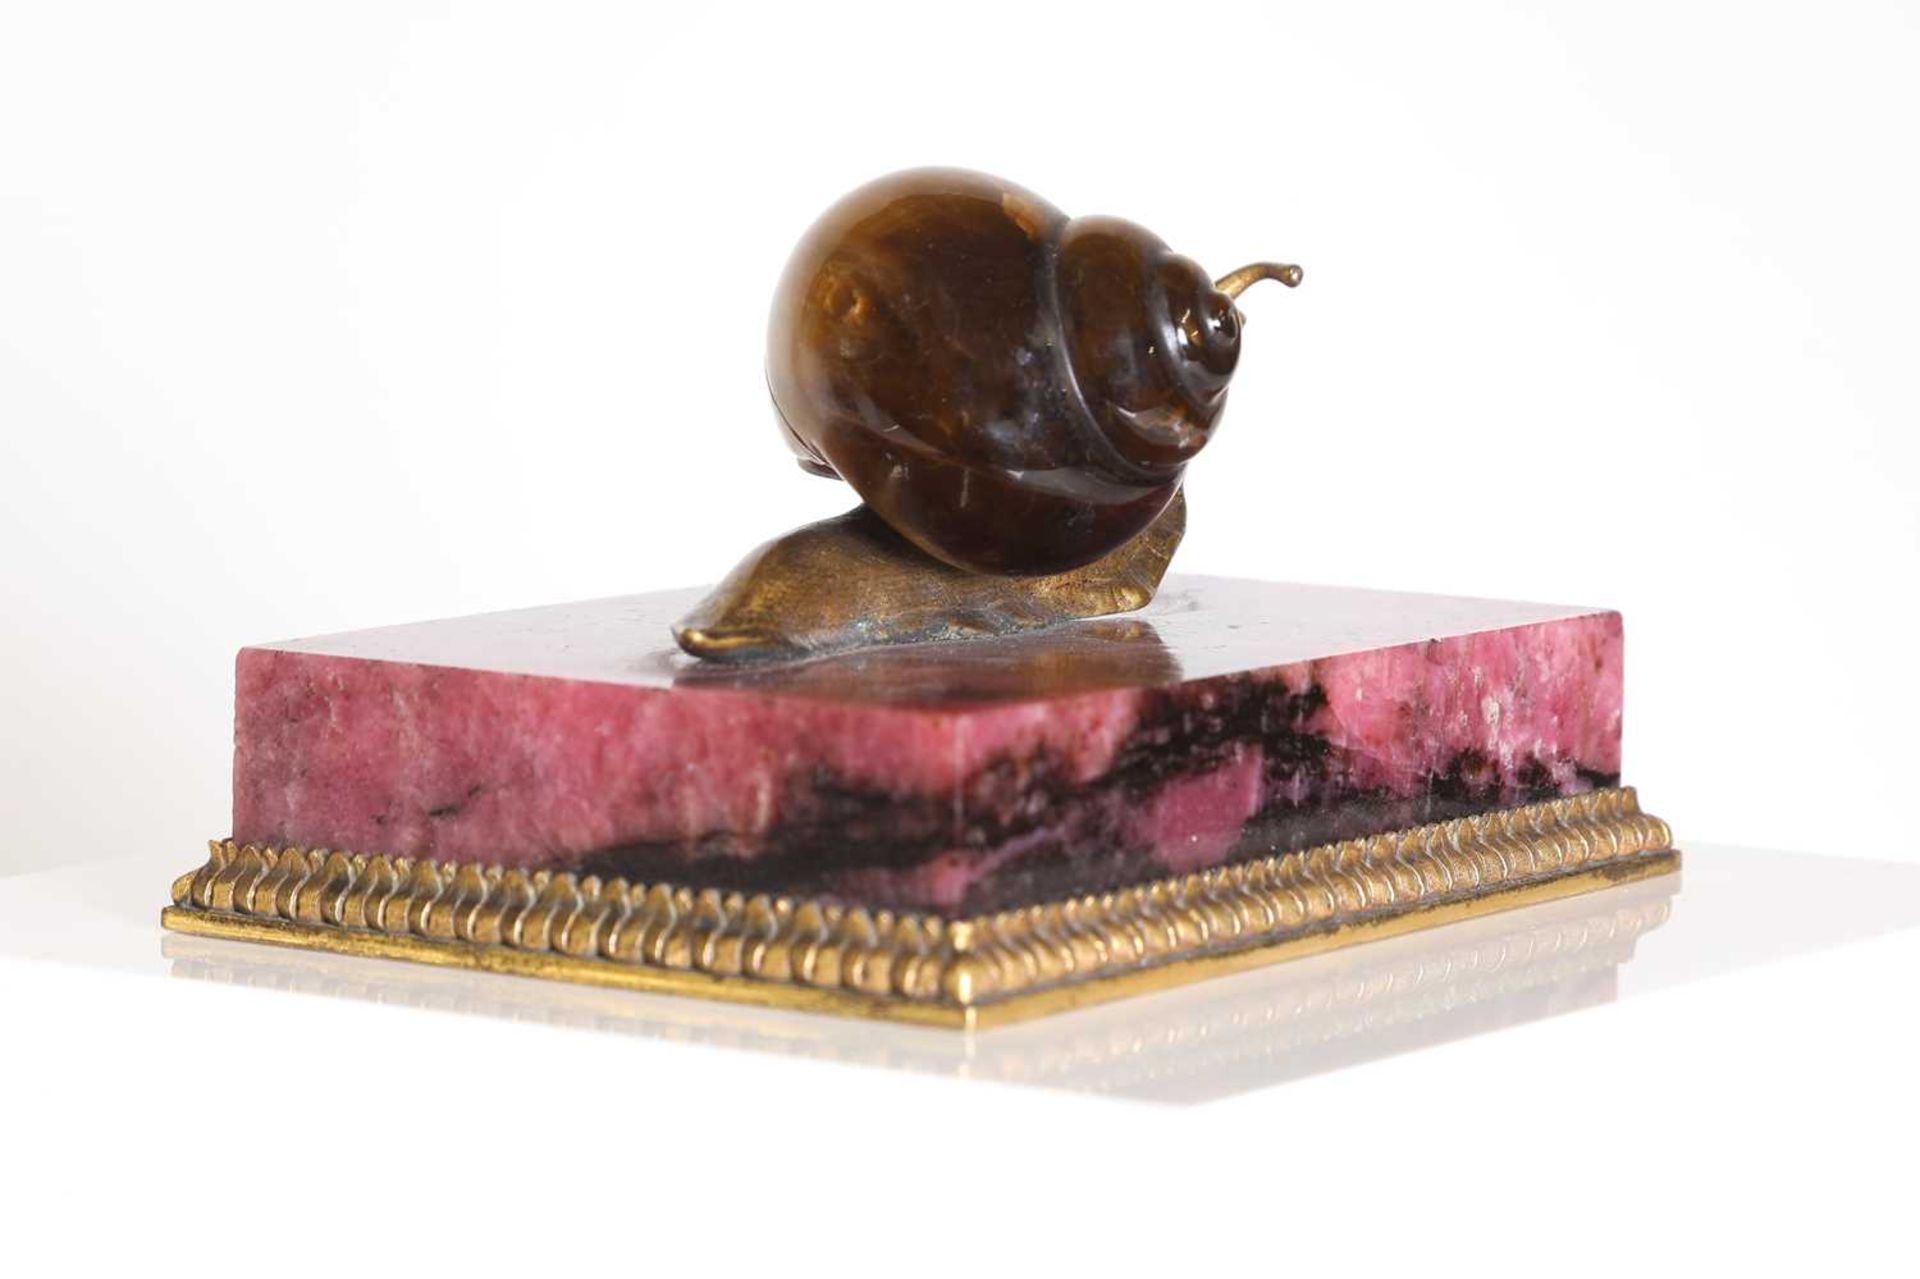 A tiger's eye and ormolu snail, - Image 6 of 25